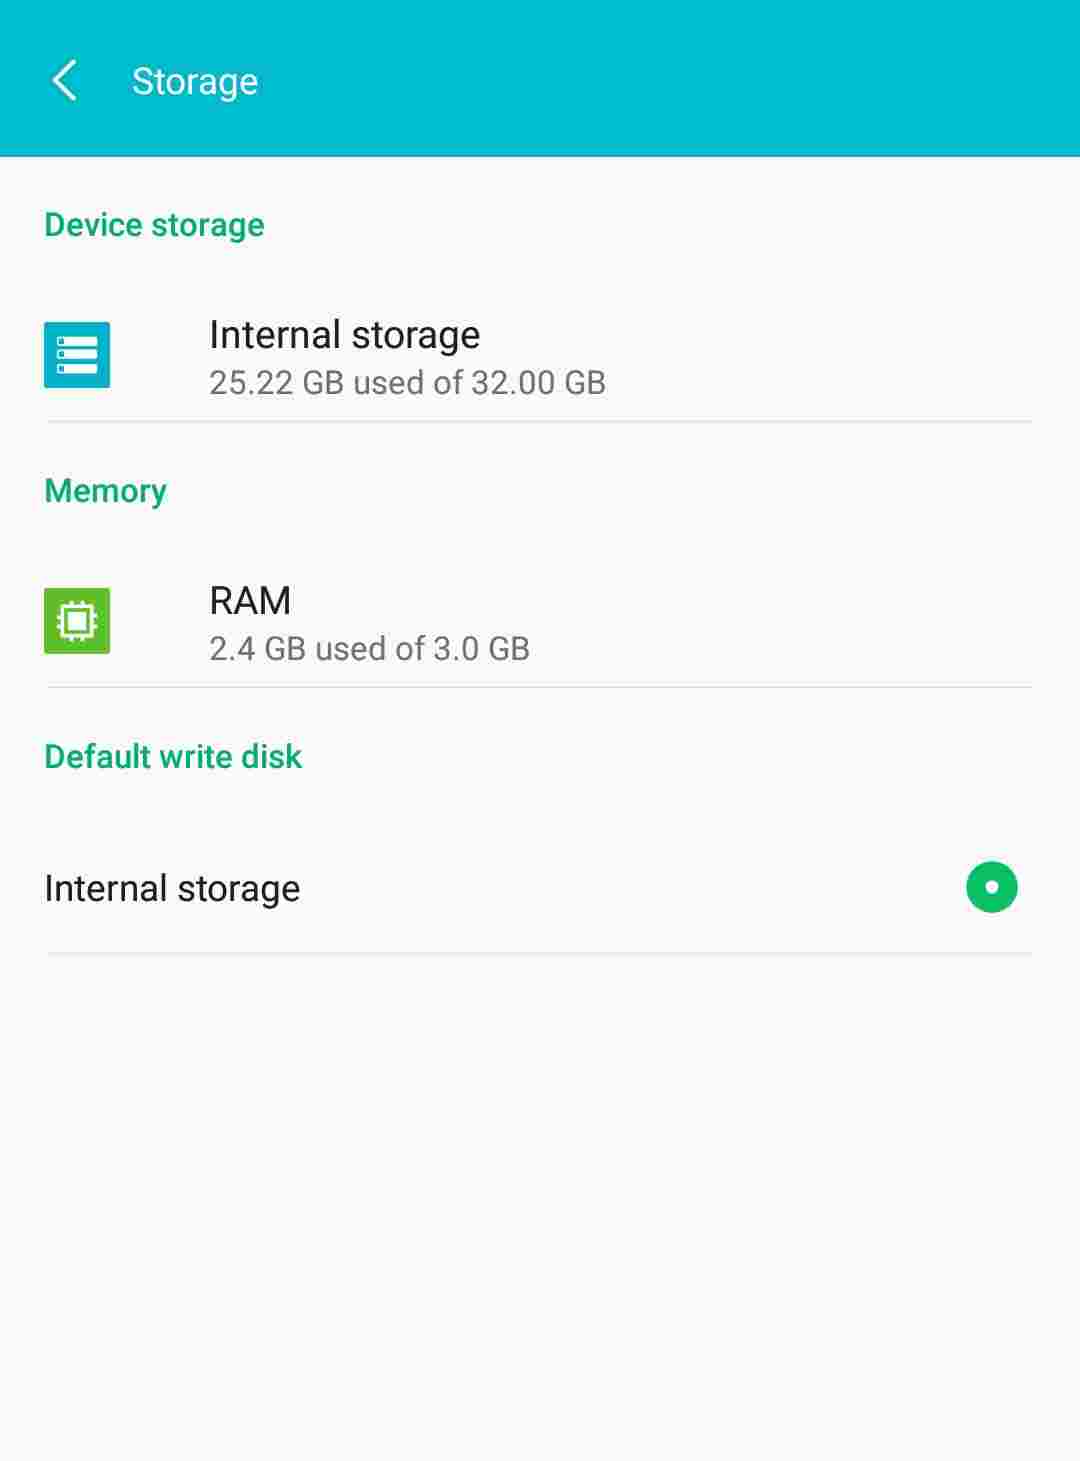 How To Quickly Setup System UI Tuner In 2mins On Android Marshmallow/Nougat Devices